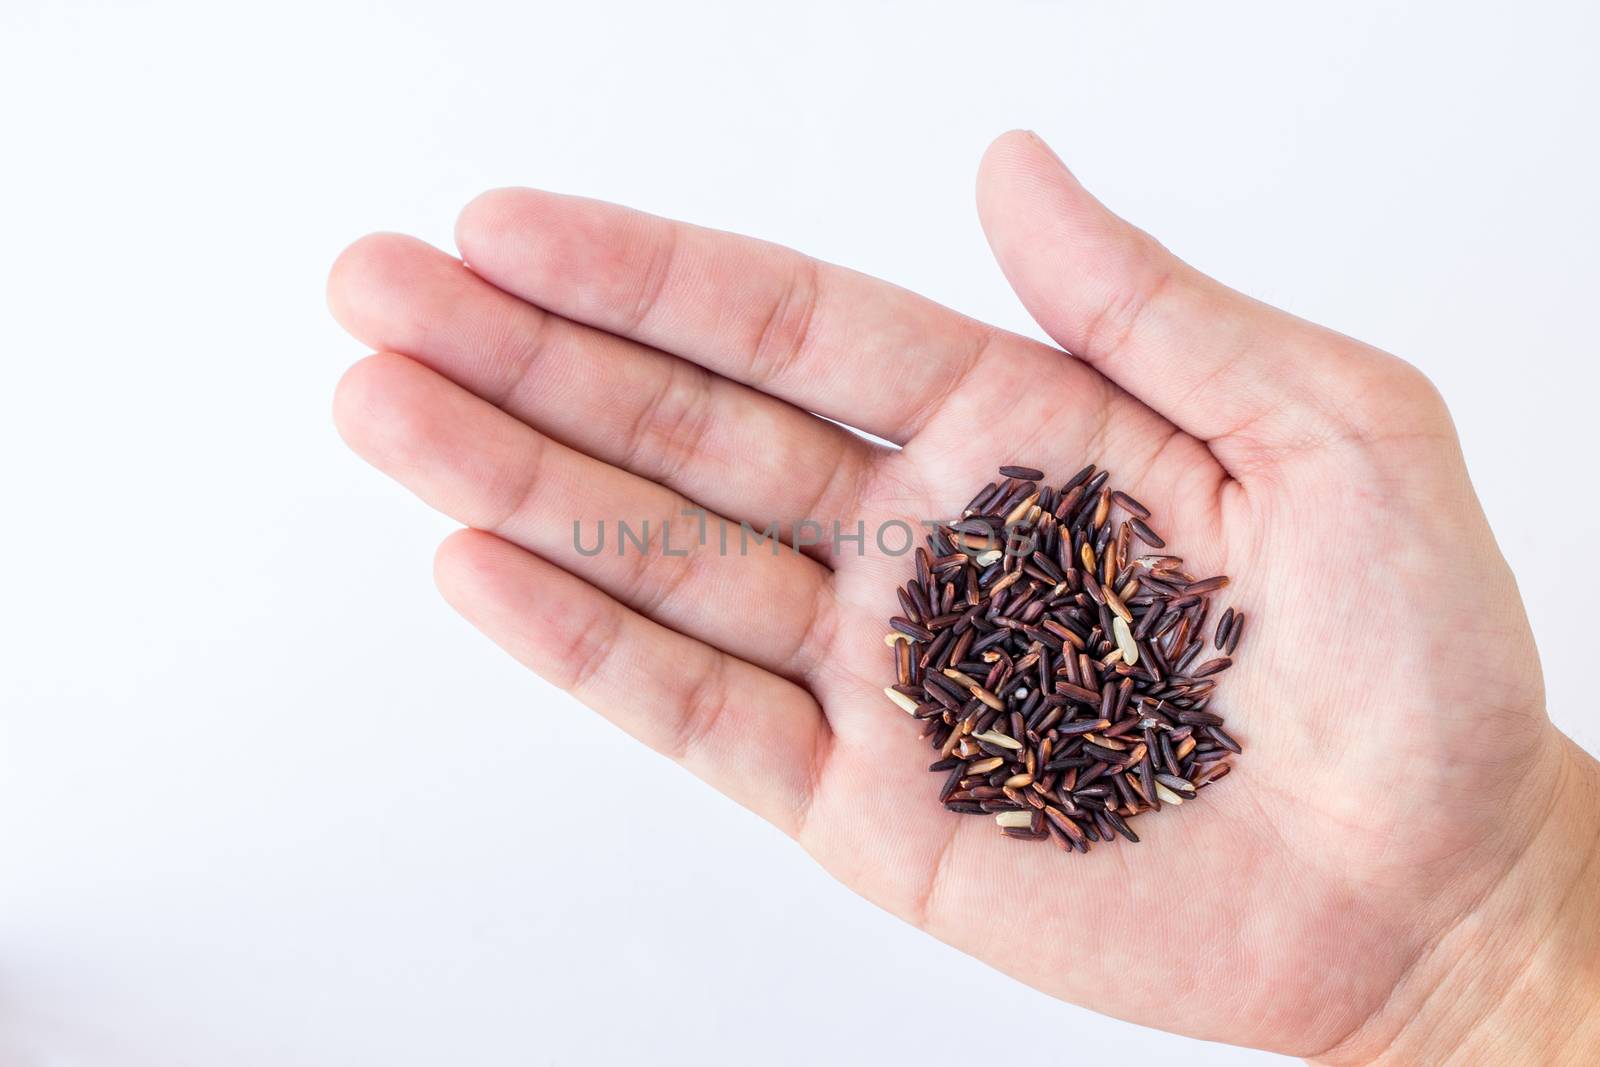 The black rice on hand